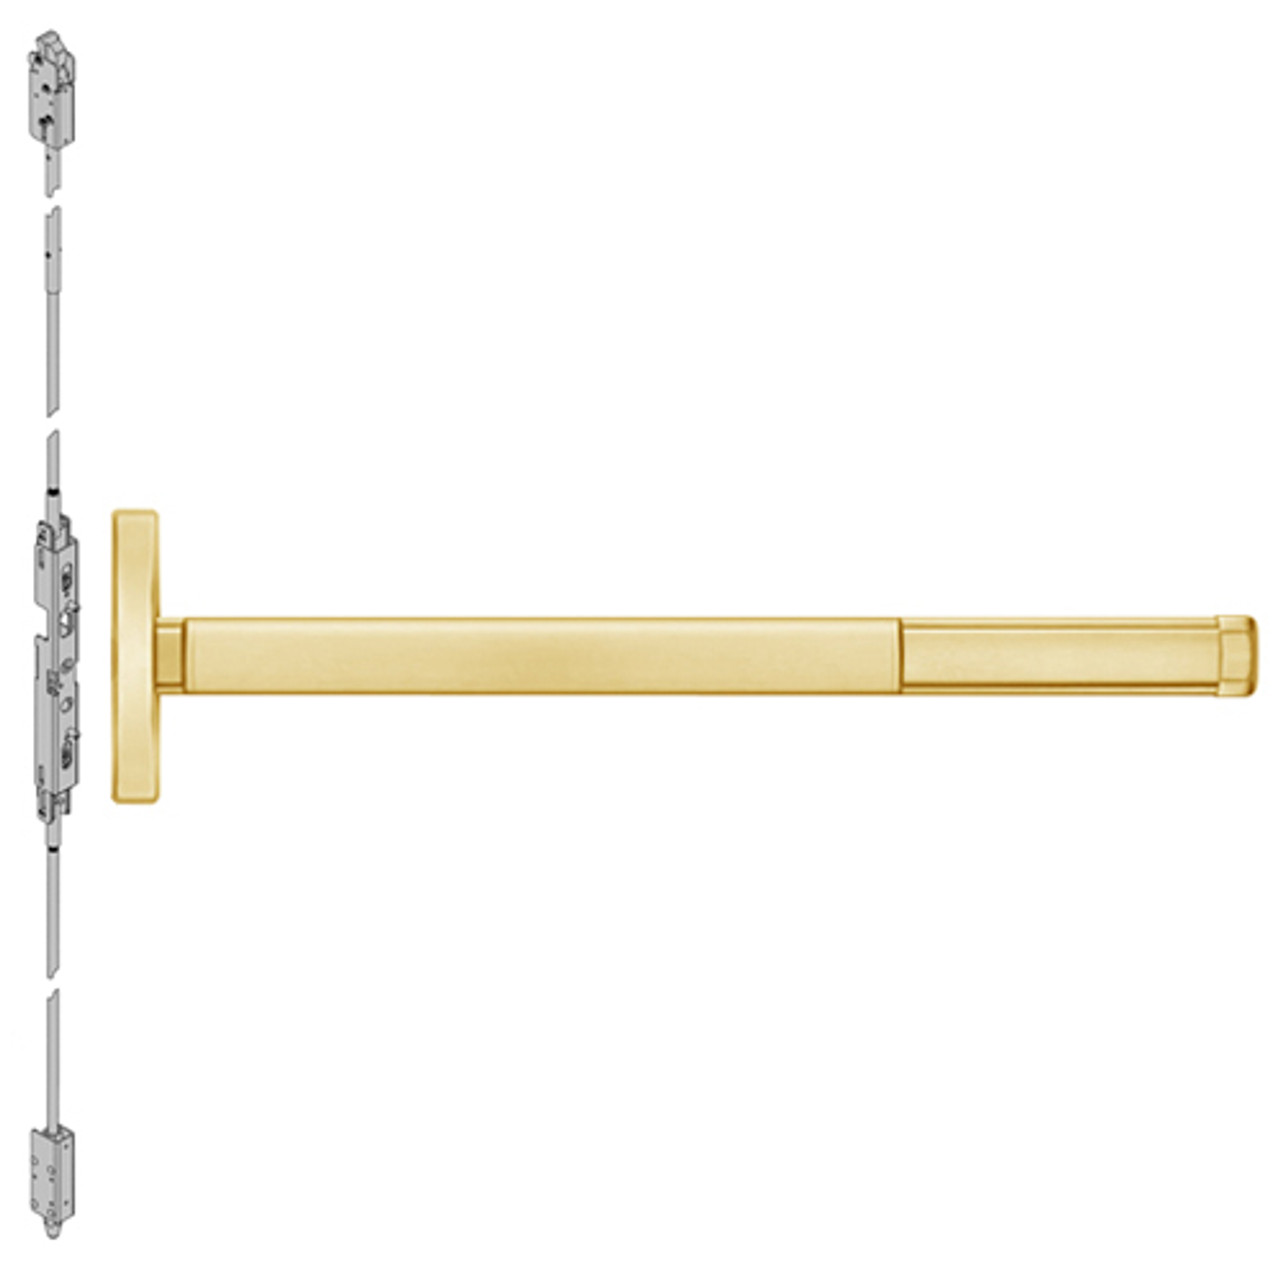 ELRFL2603-605-36 PHI 2600 Series Fire Rated Concealed Vertical Rod Exit Device with Electric Latch Retraction Prepped for Key Retracts Latchbolt in Bright Brass Finish